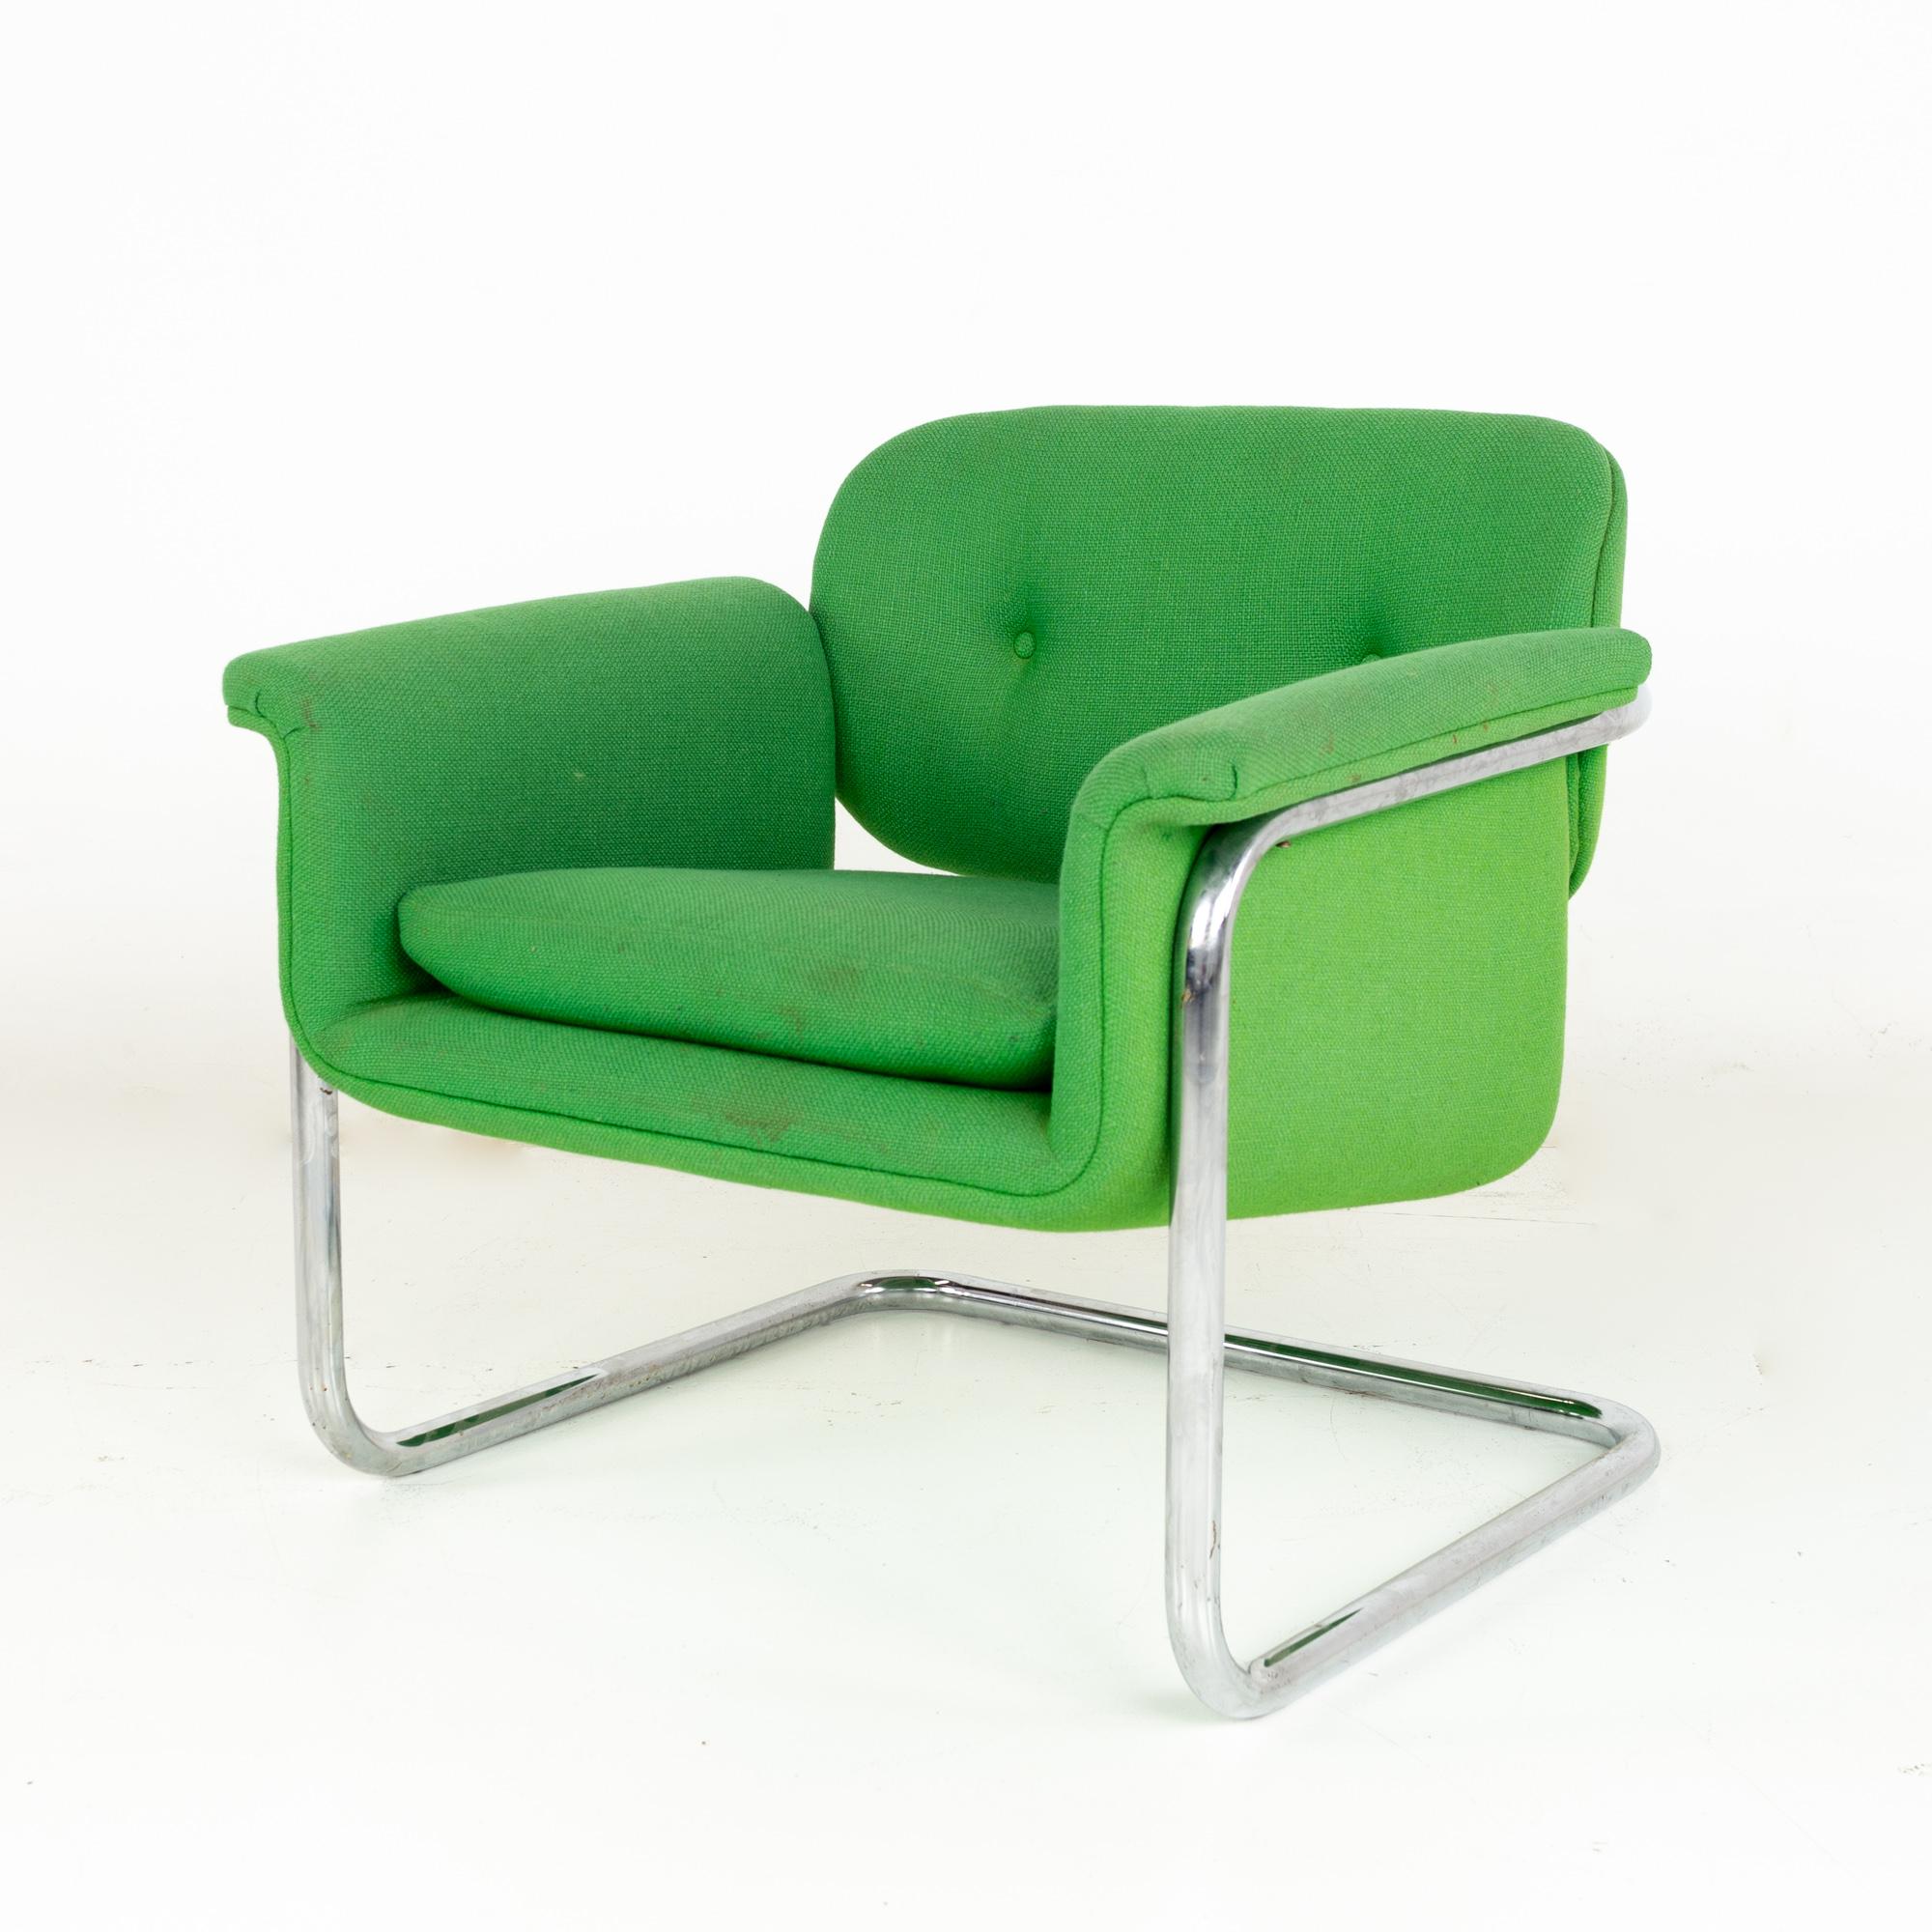 Late 20th Century Mid Century Green and Chrome Cantilever Lounge Chairs, a Pair